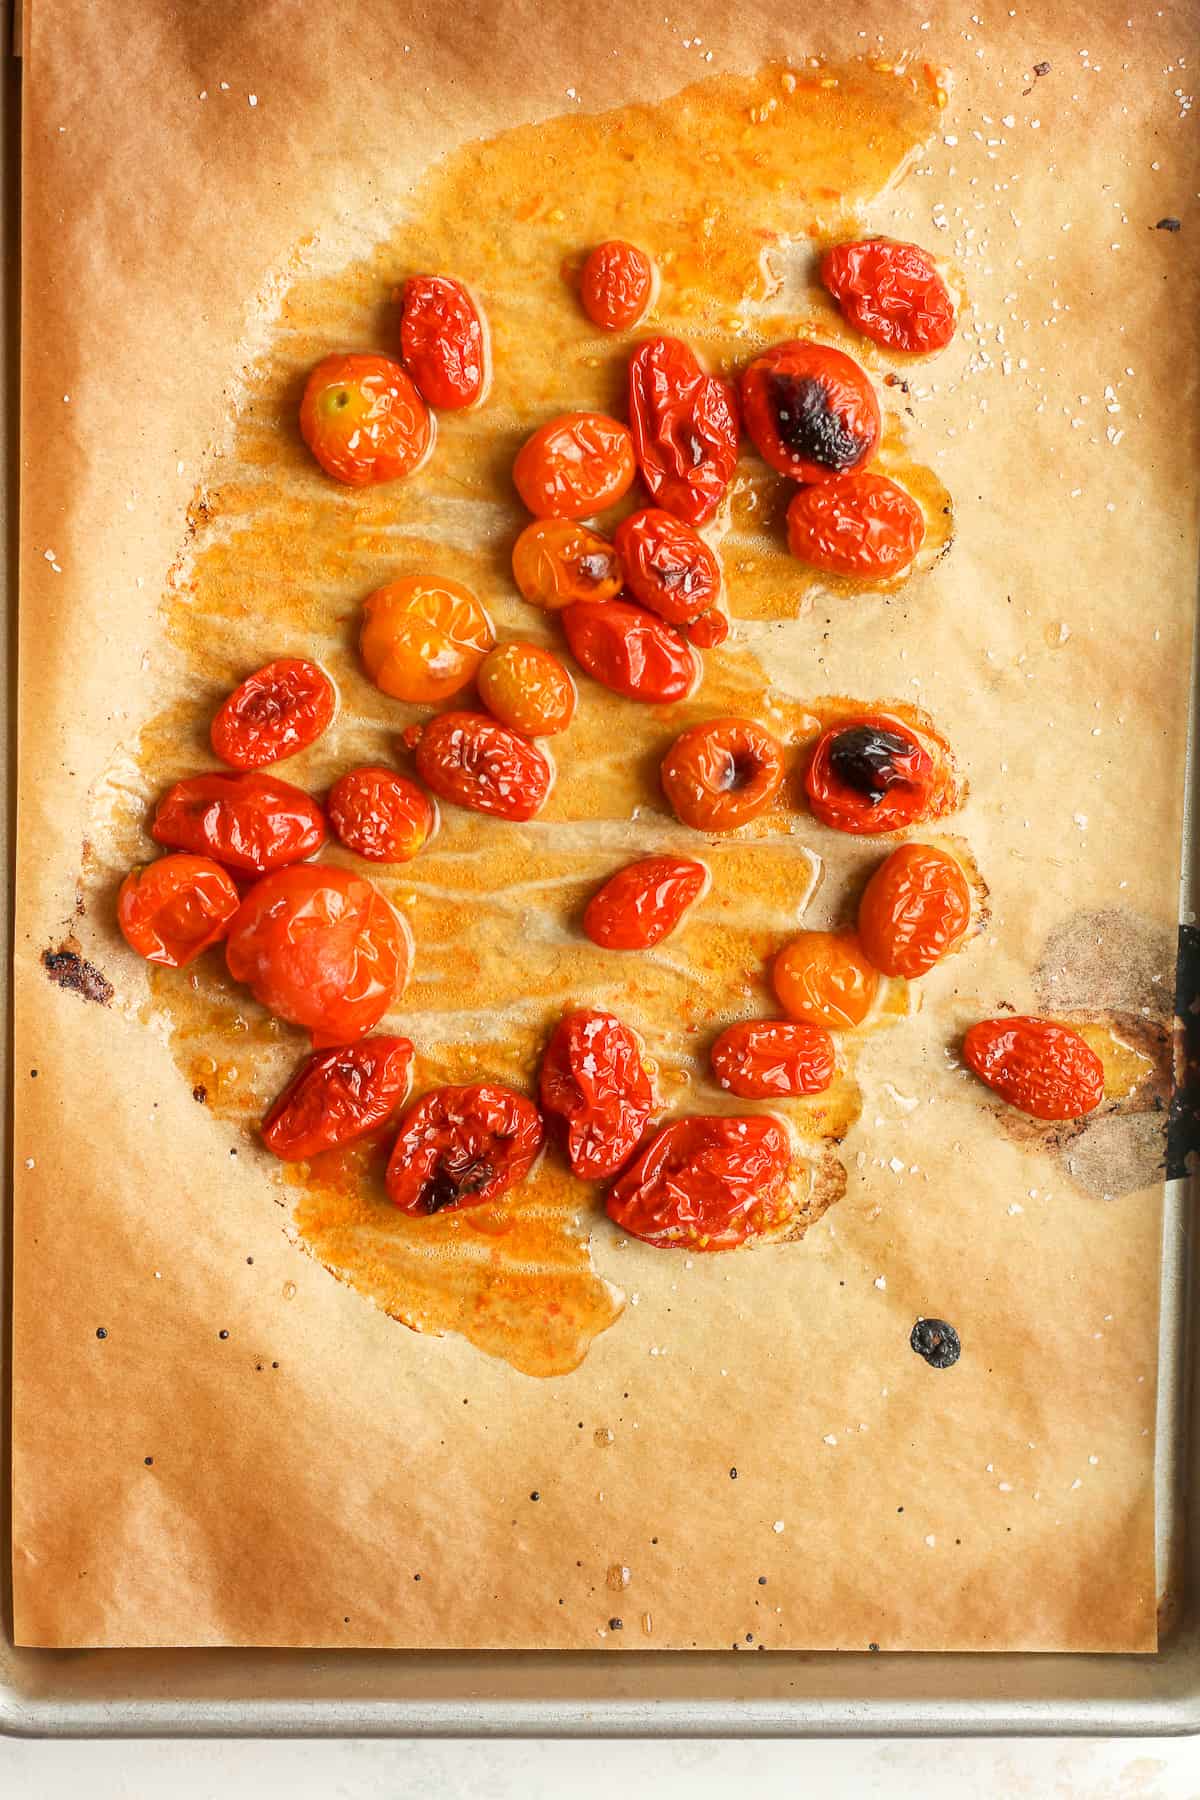 A pan of roasted tomatoes.